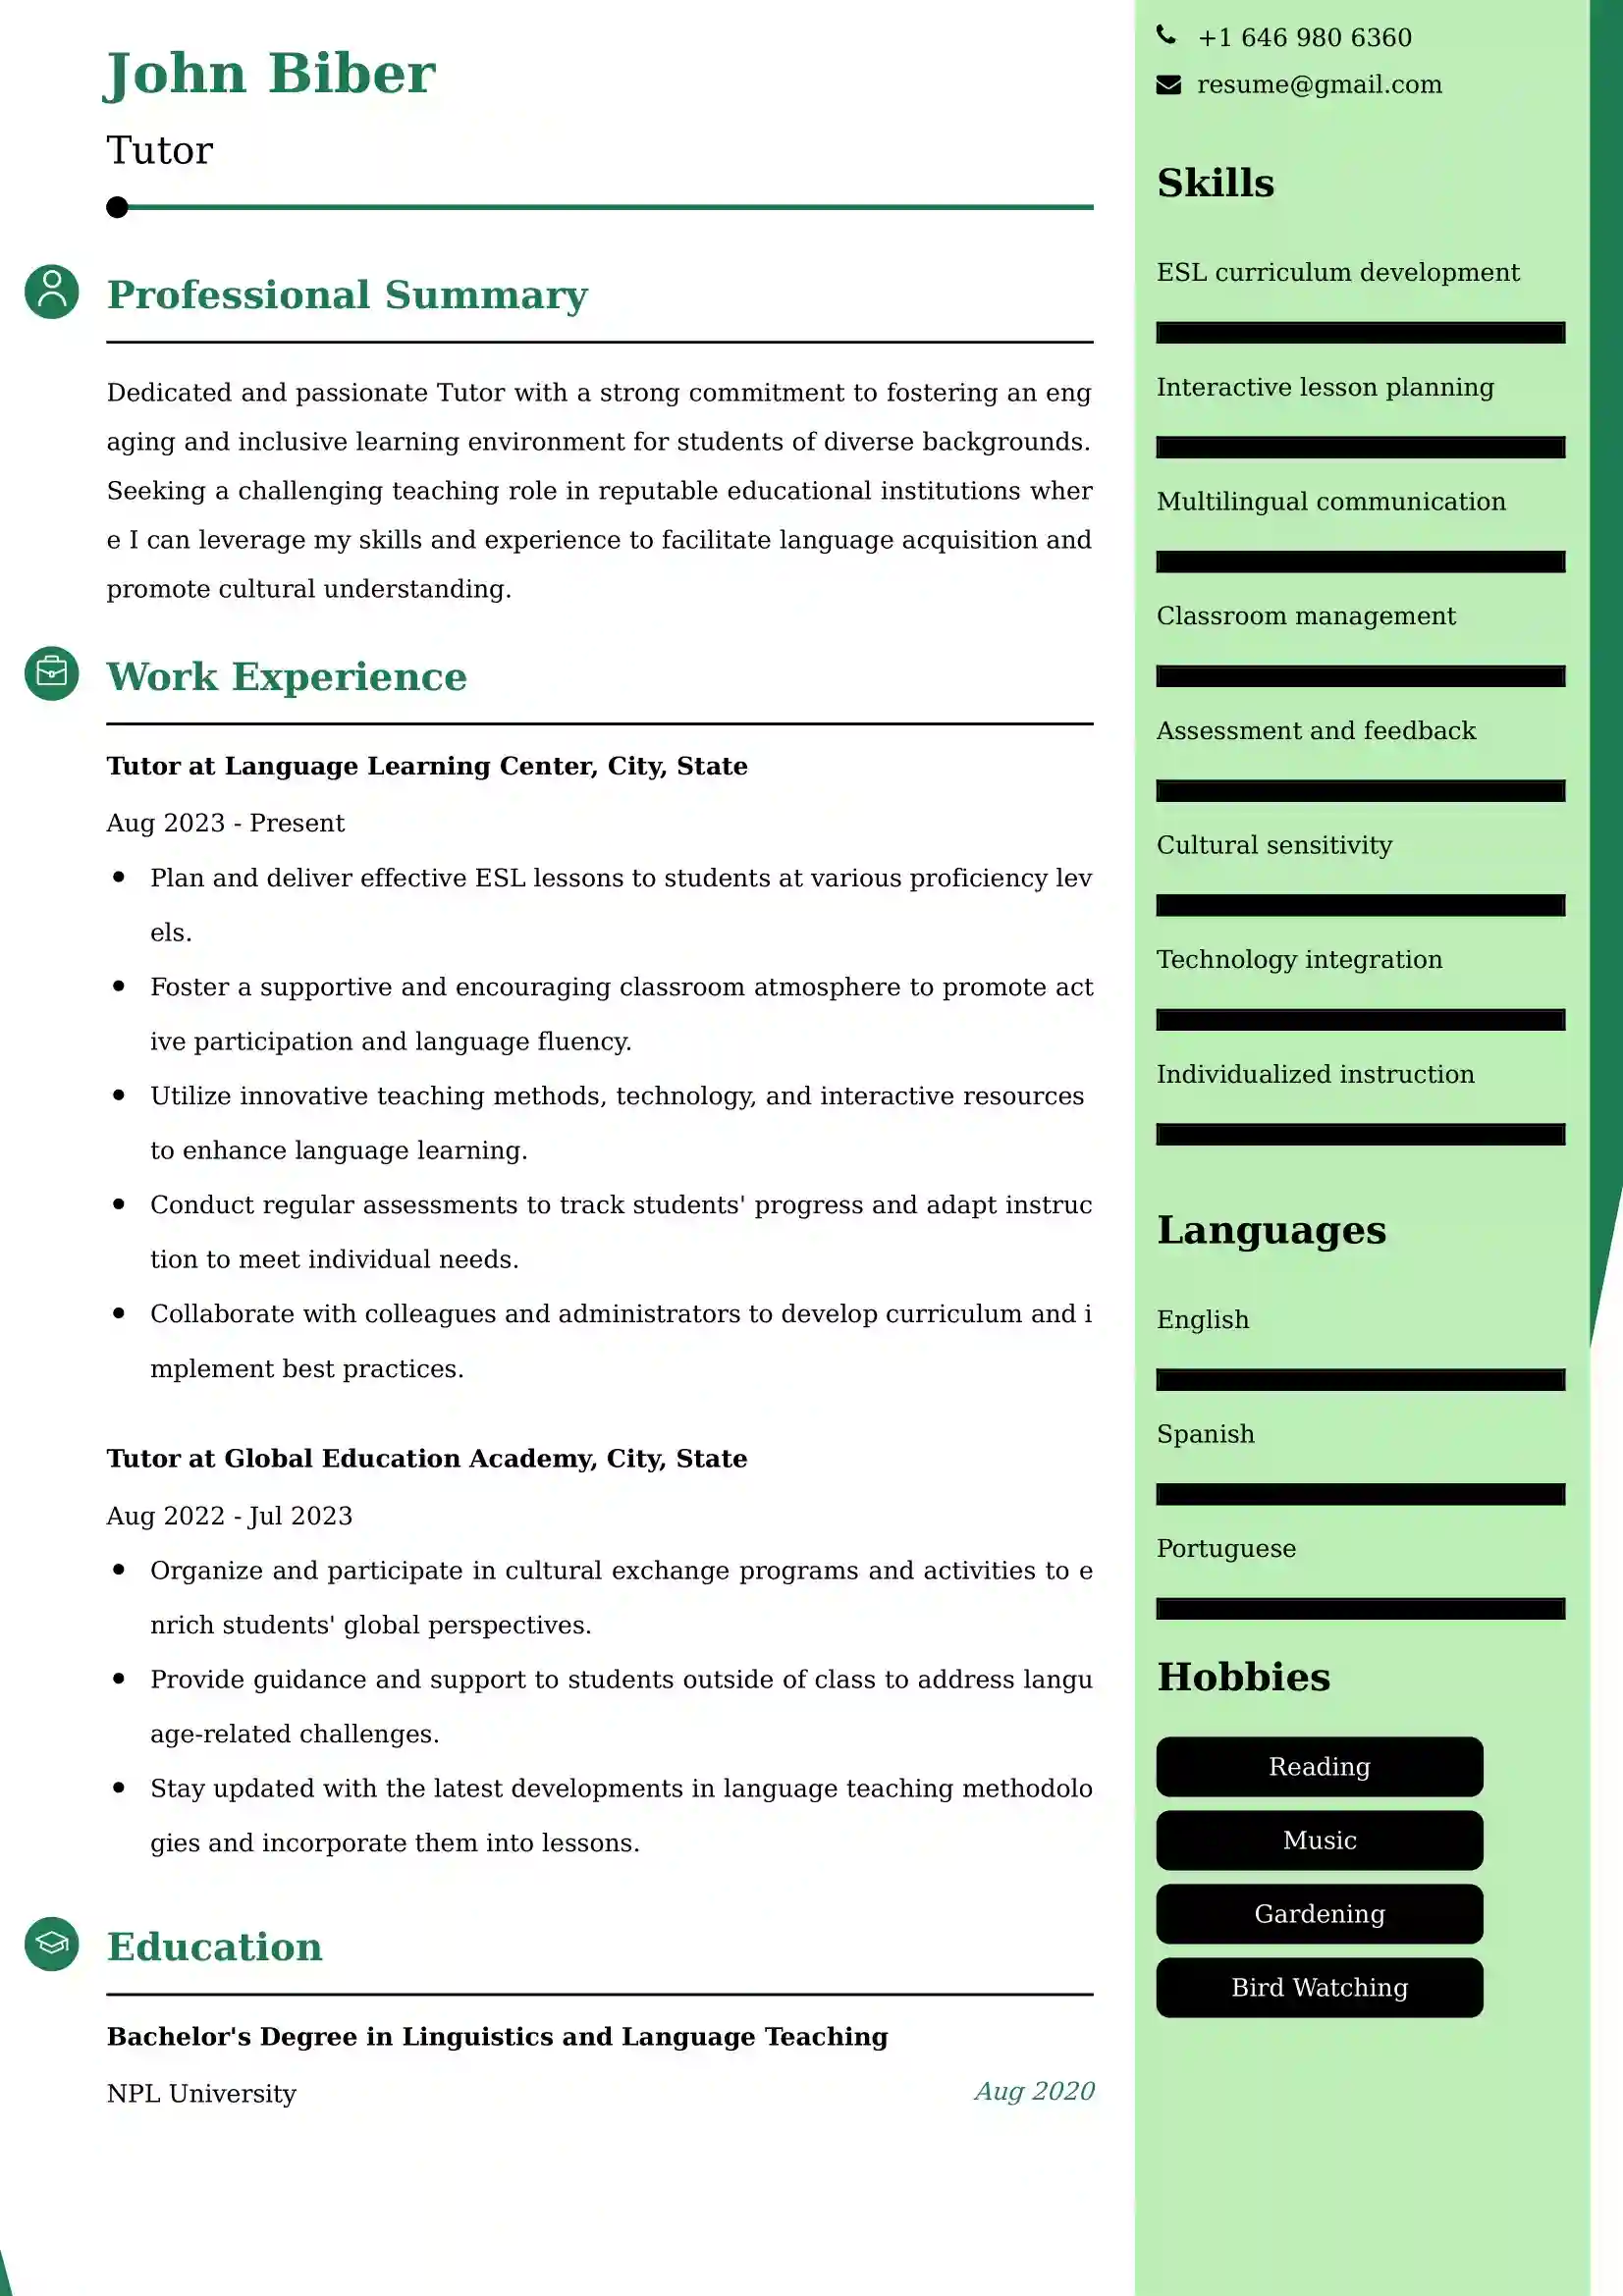 Tutor Resume Examples - Australian Format and Tips